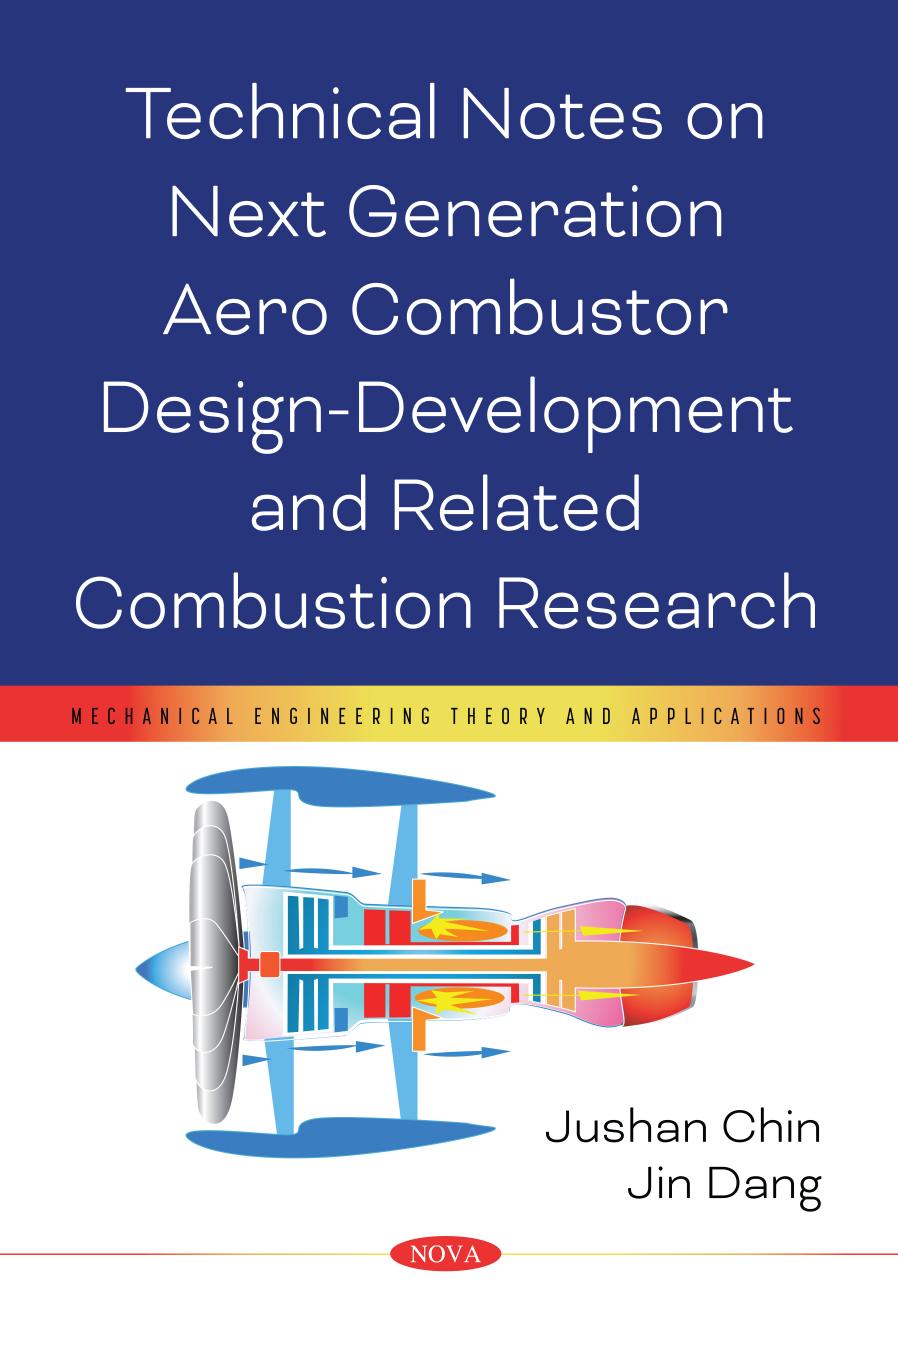 (eBook PDF)Technical Notes on Next Generation Aero Combustor Design-development and Related Combustion Research by Jushan Chin,Jin Dang